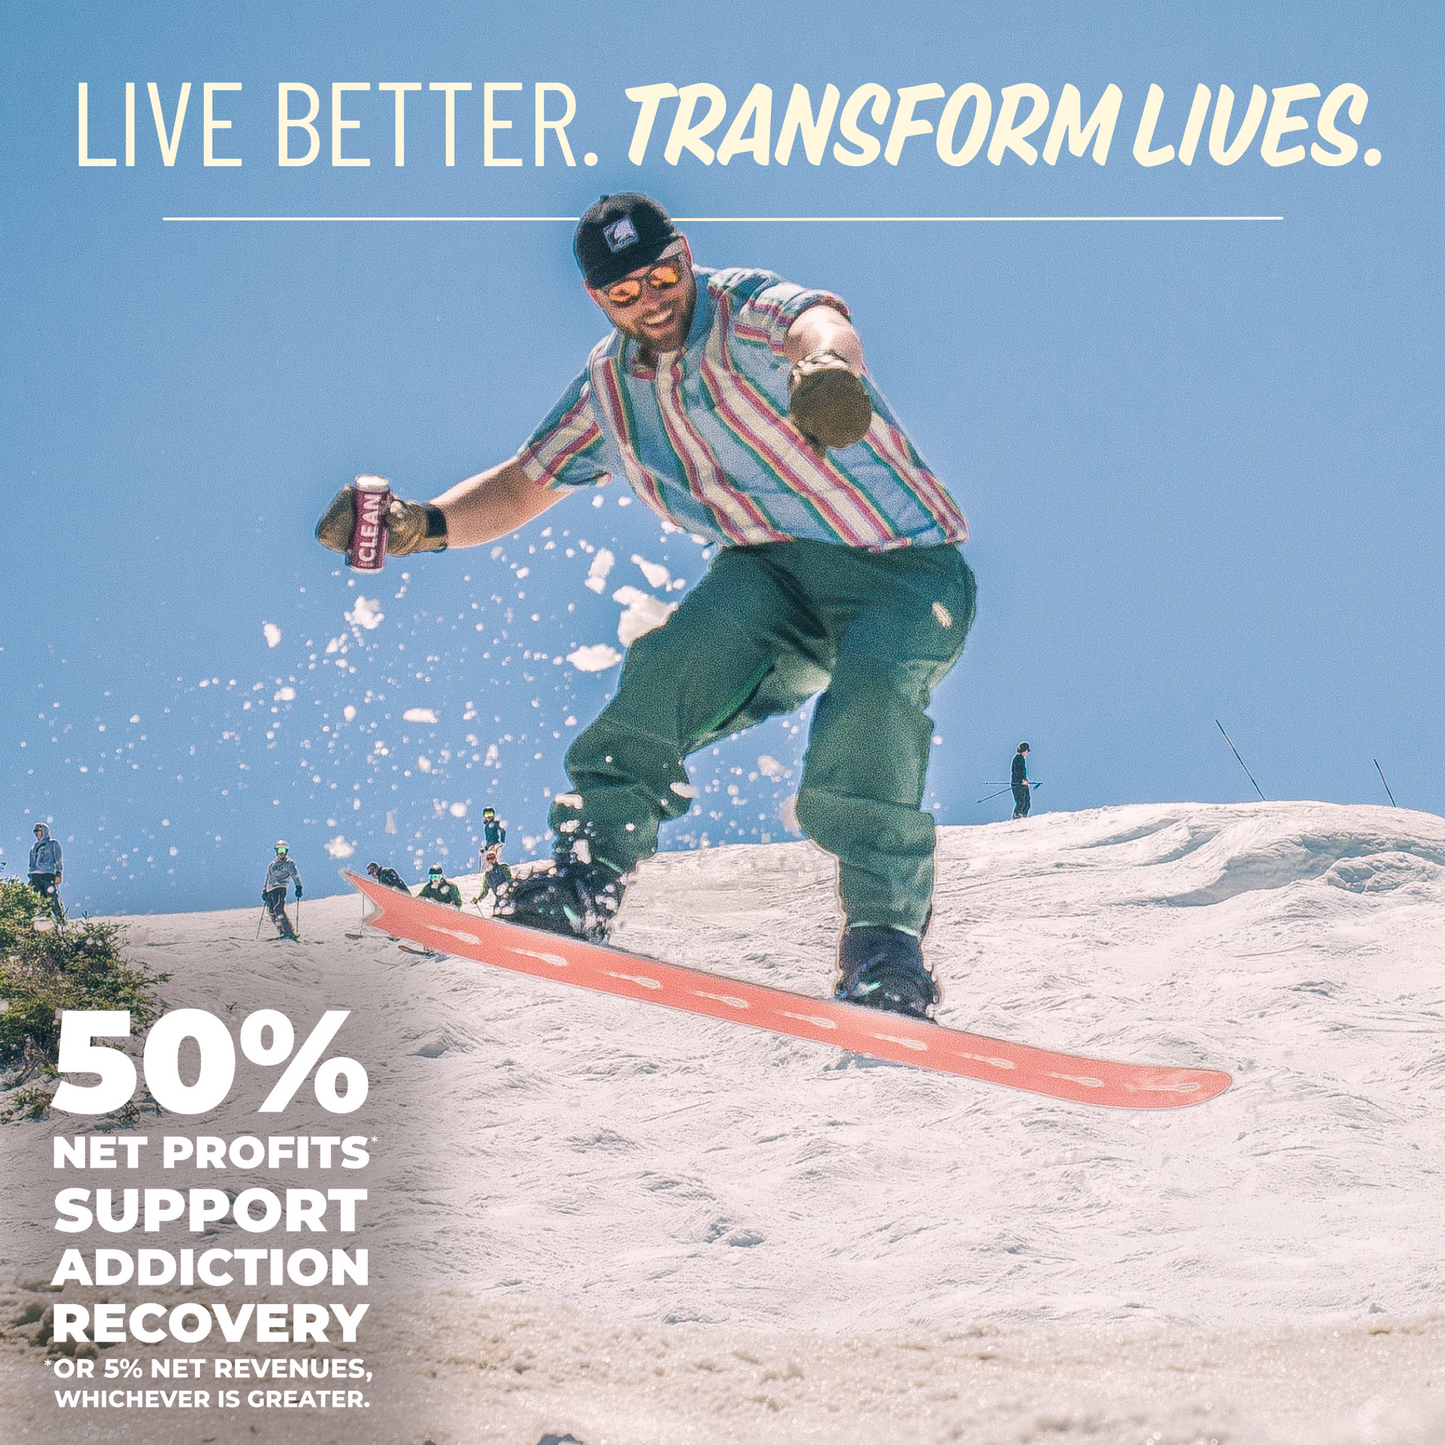 A man snowboarding holding a can of Blackberry CLEAN Cause with the slogan Live Better. Transform Lives. above her and 50% Net profits* support addiction recovery *or 5% net revenues, whichever is greater